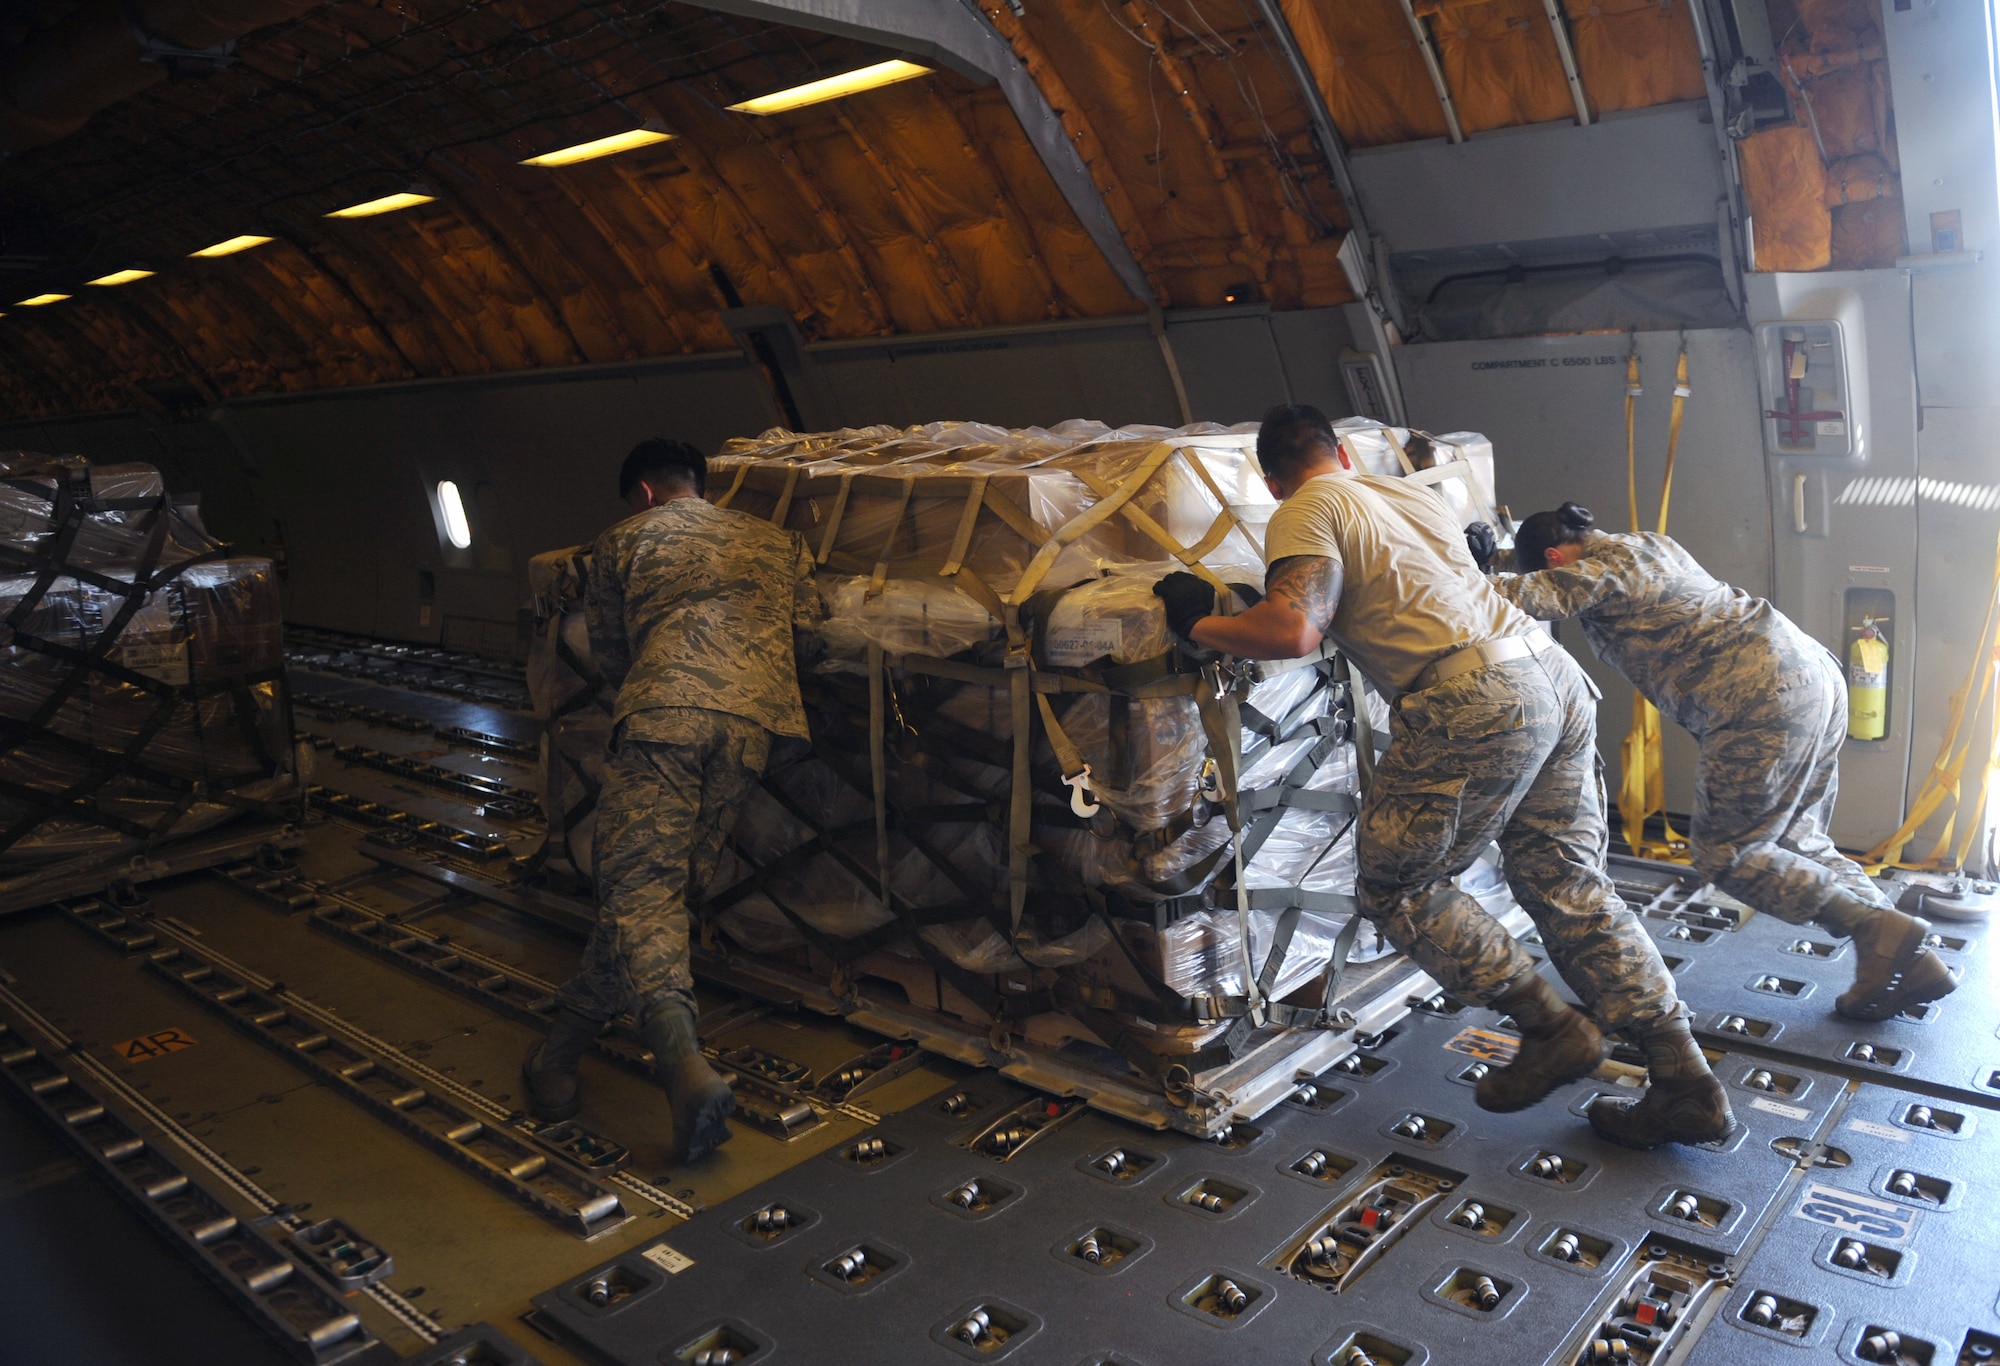 U.S. Air Force Airmen assigned to the 7th Logistics Readiness Squadron push a pallet of packed fortified dehydrated food into a KC-10 Extender at Dyess Air Force Base, Texas, Sept. 20, 2016. The shipment was the largest on record for Global Samaritan Resources for refuges in Iraq, equaling about 475,000 servings. (U.S. Air Force photo by Airman 1st Class Rebecca Van Syoc)